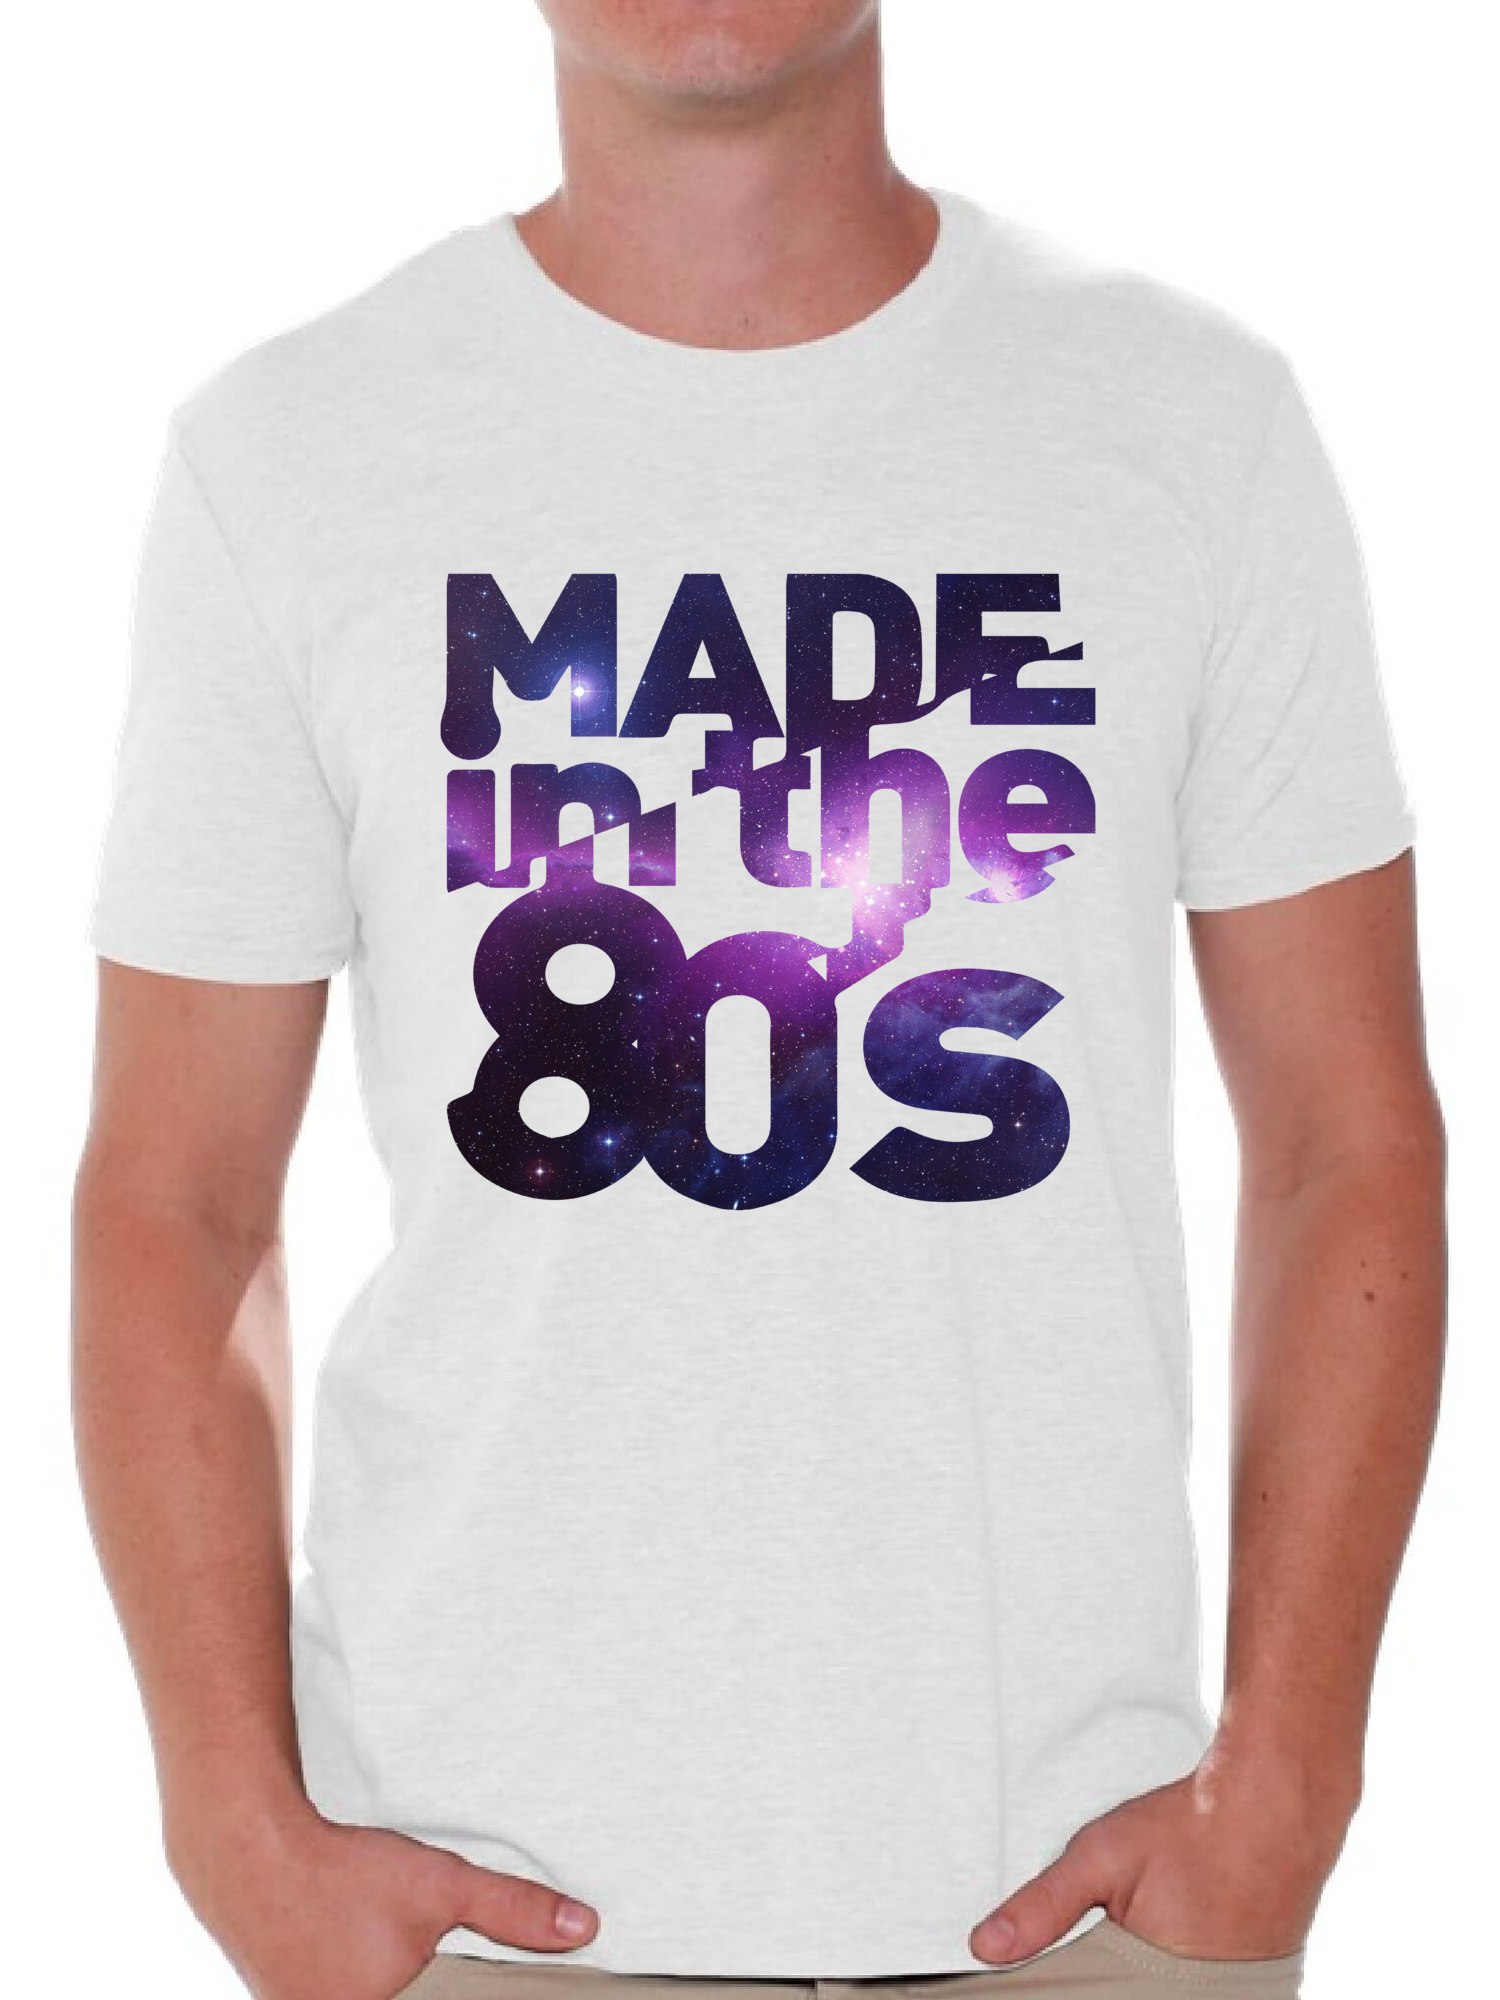 Awkward Styles Made in 80s T Shirt 80s Birthday Shirt 80s Accessories 80s Rock T Shirt 80s T Shirt Retro Vintage Rock Concert T-Shirt 80s Costume 80s Clothes for Men 80s Outfit 80s Party - image 1 of 4